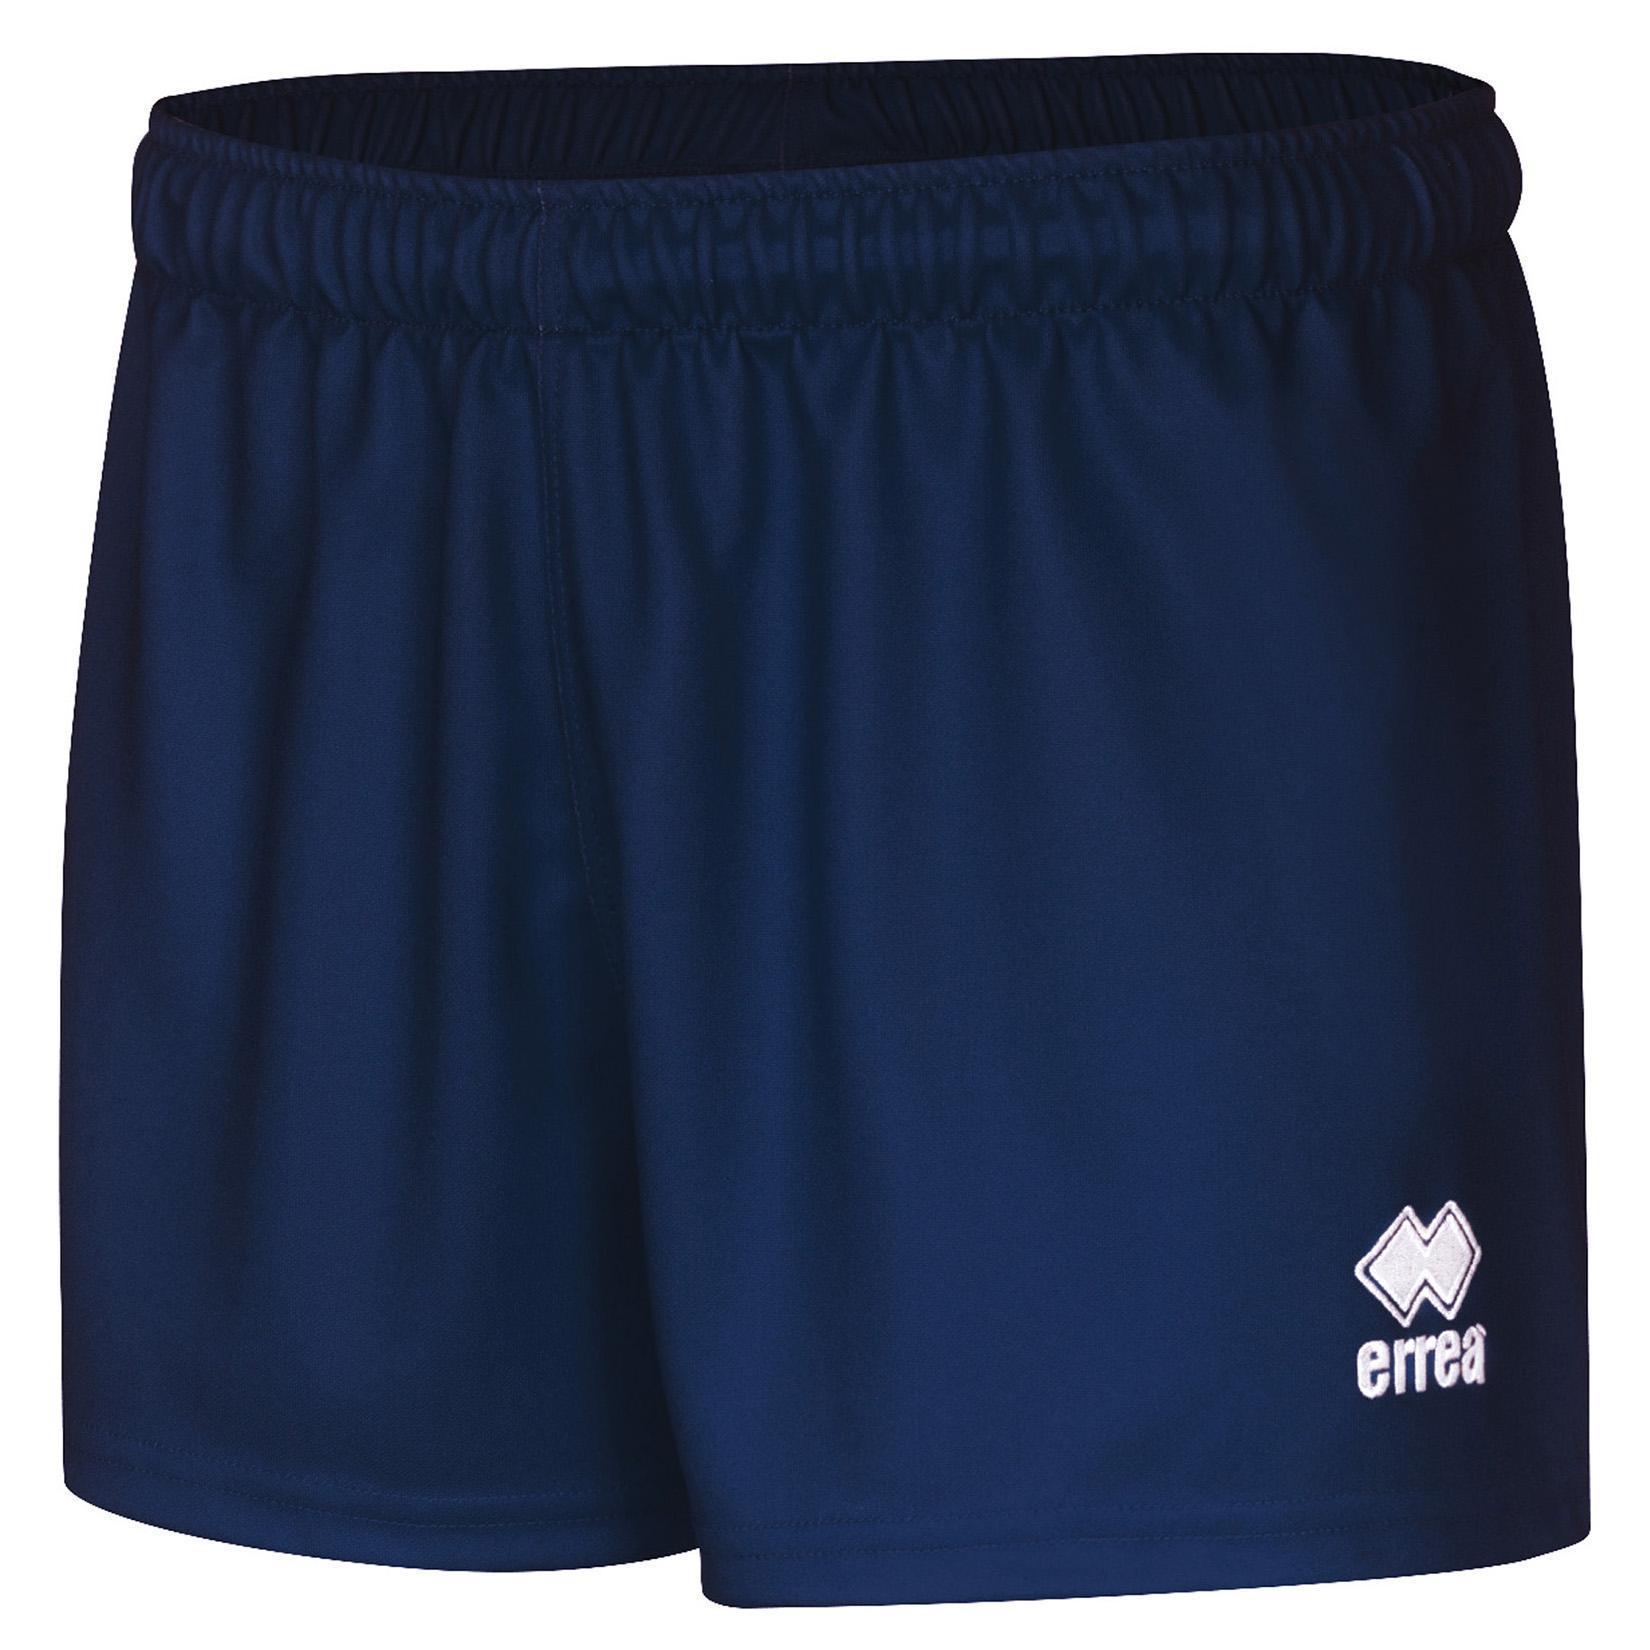 Errea Brest Rugby Short Adults